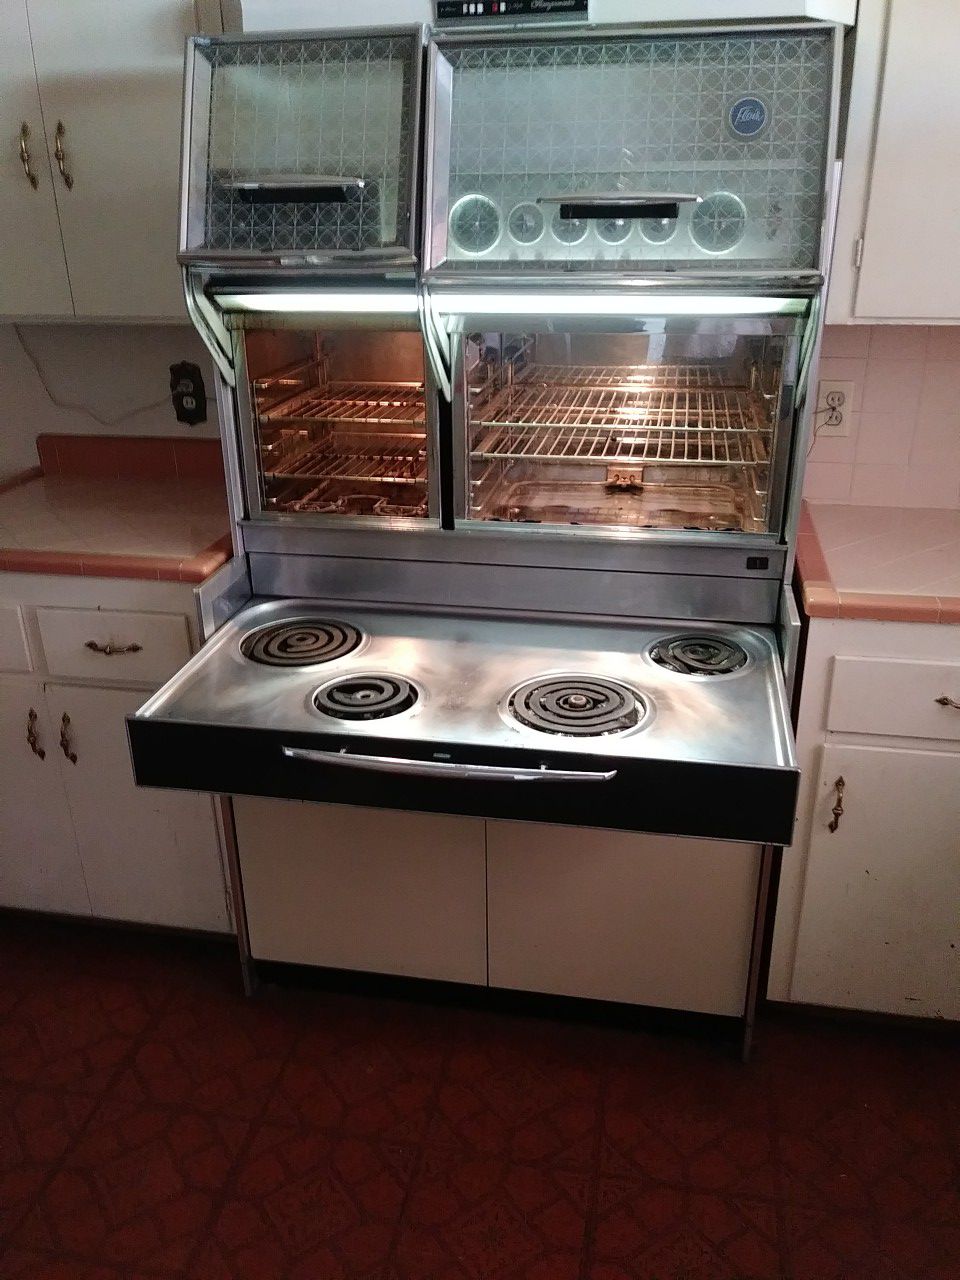 1960 - 62 Frigidaire Custom Imperial Flair stove and oven